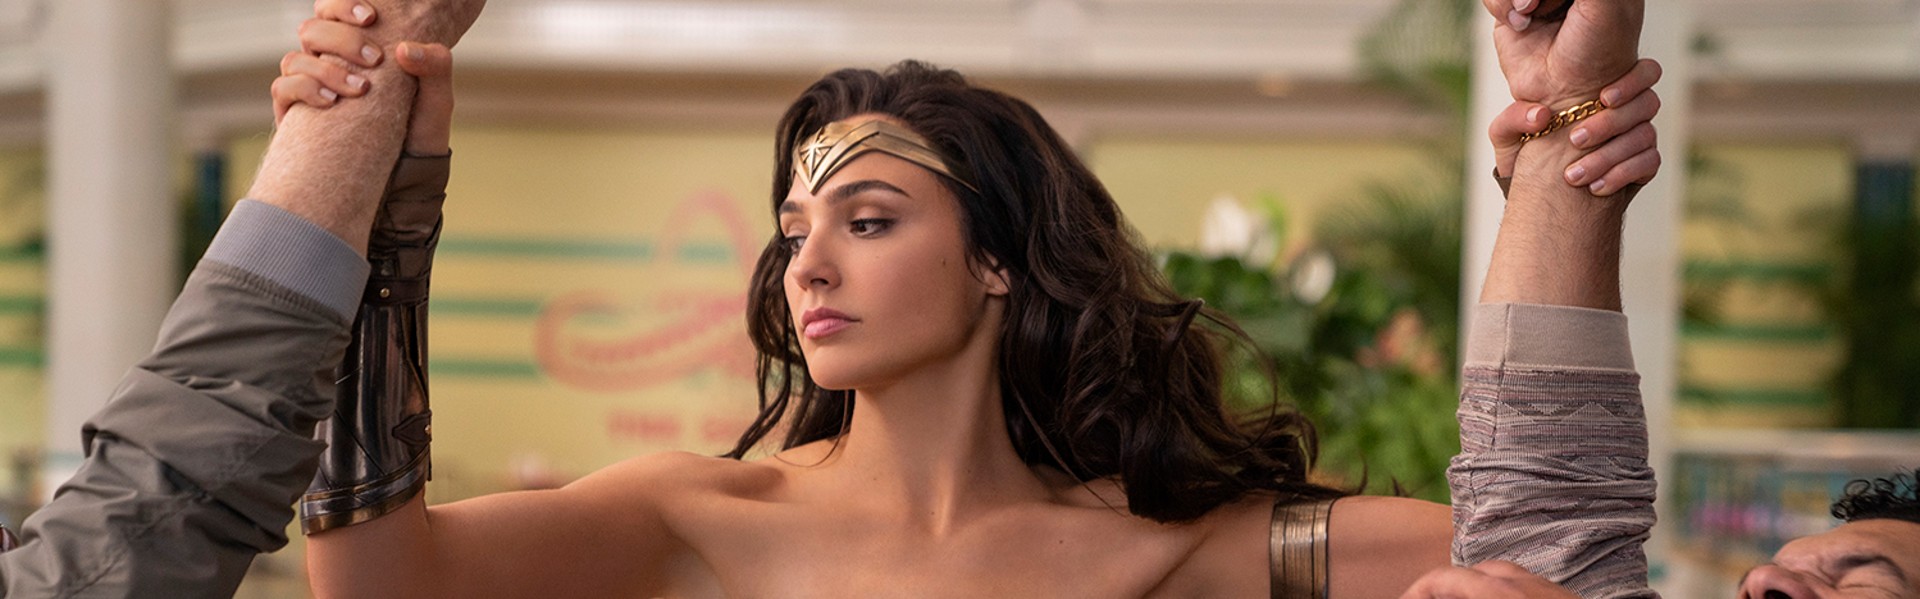 “Wonder Woman 3” with Gal Gadot, however, will not be created, as DC has no plans for a movie as of yet